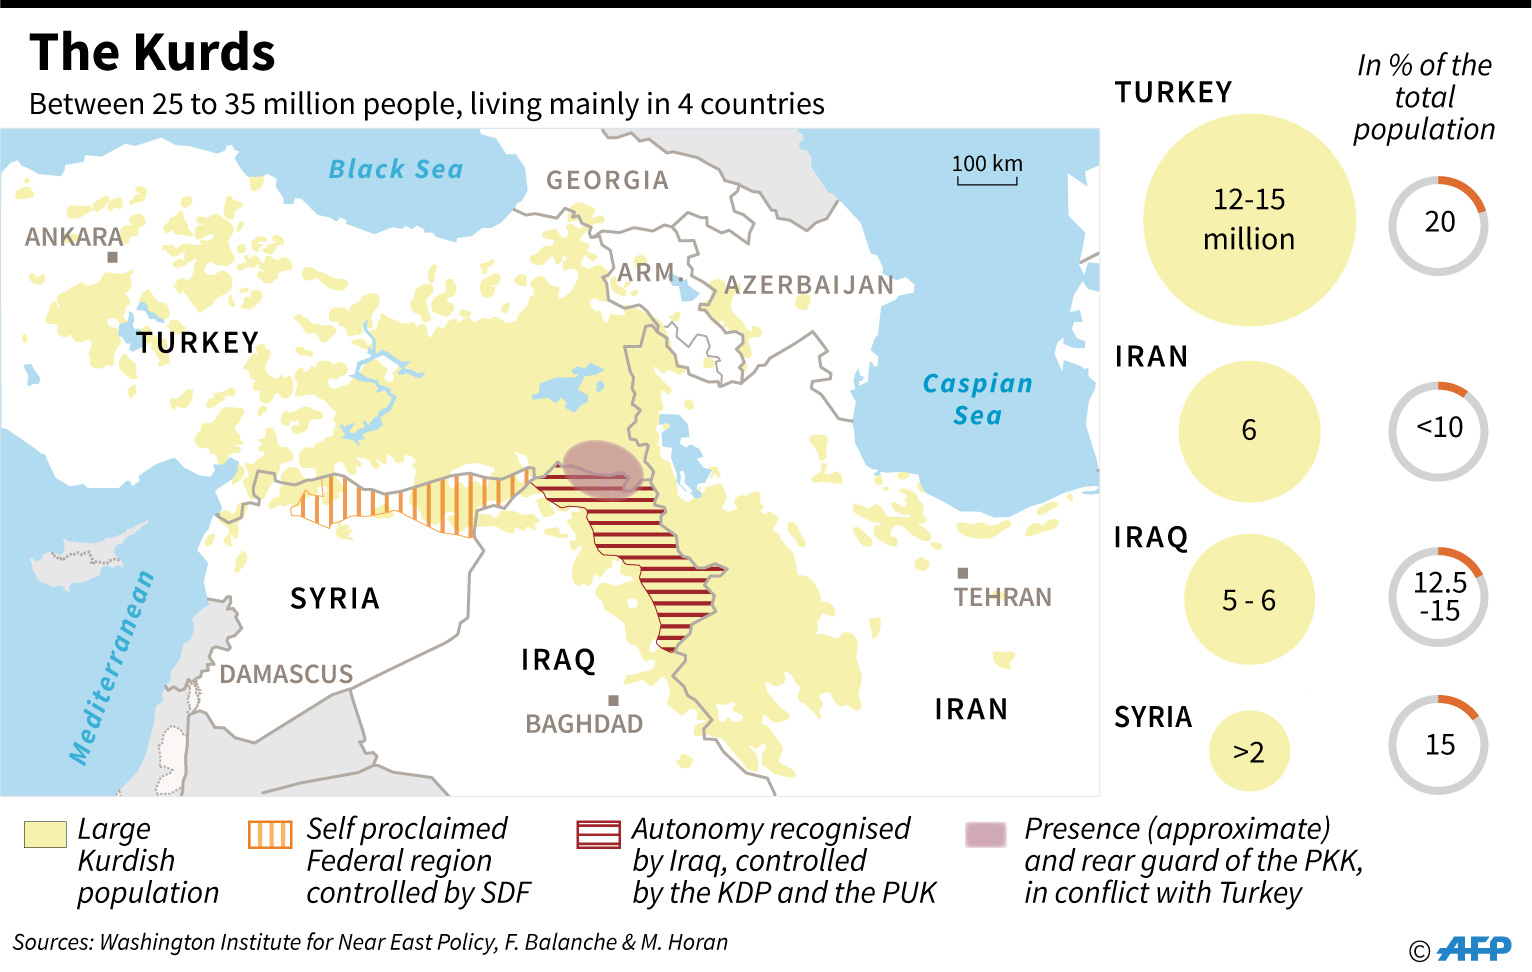 Map locating Kurdish regions in Turkey, Syria, Iran and Iraq and their percentage of the total population.